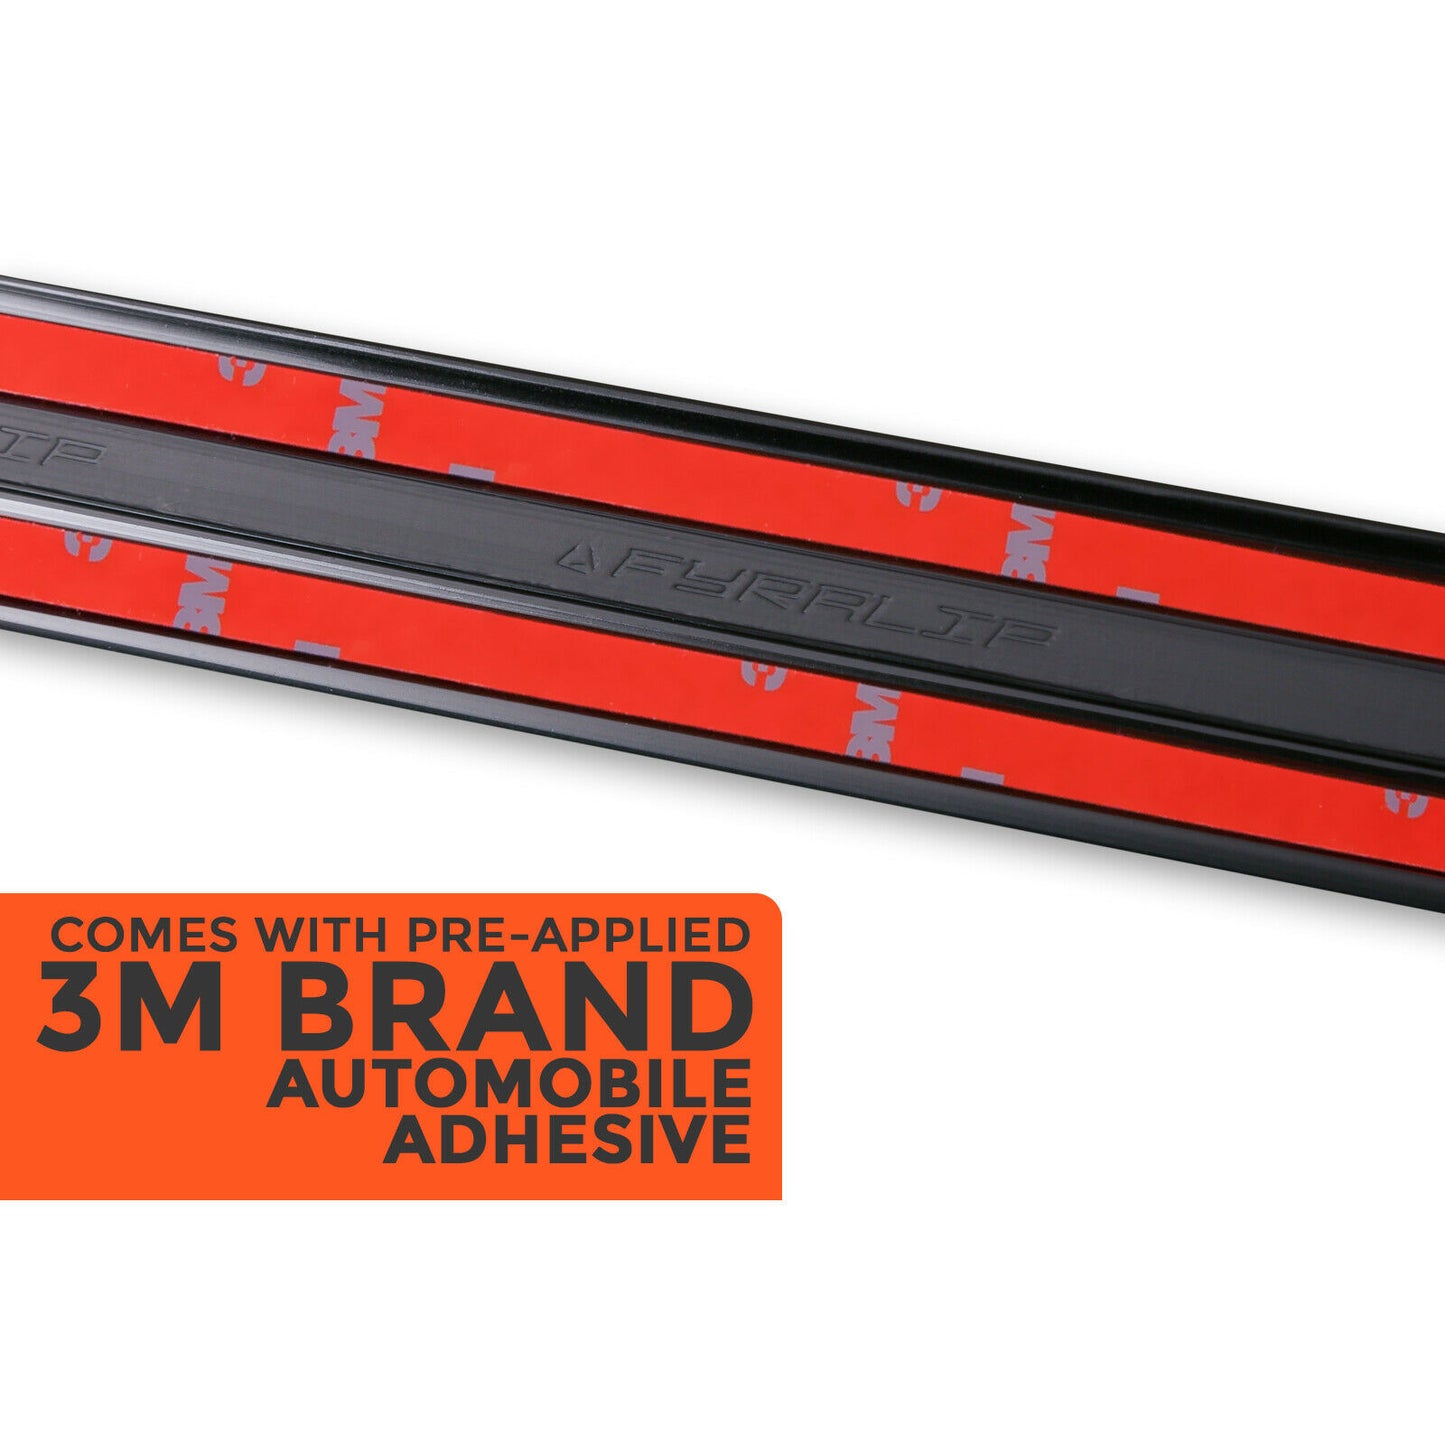 Rear Spoiler for BMW X5 F15 Painted